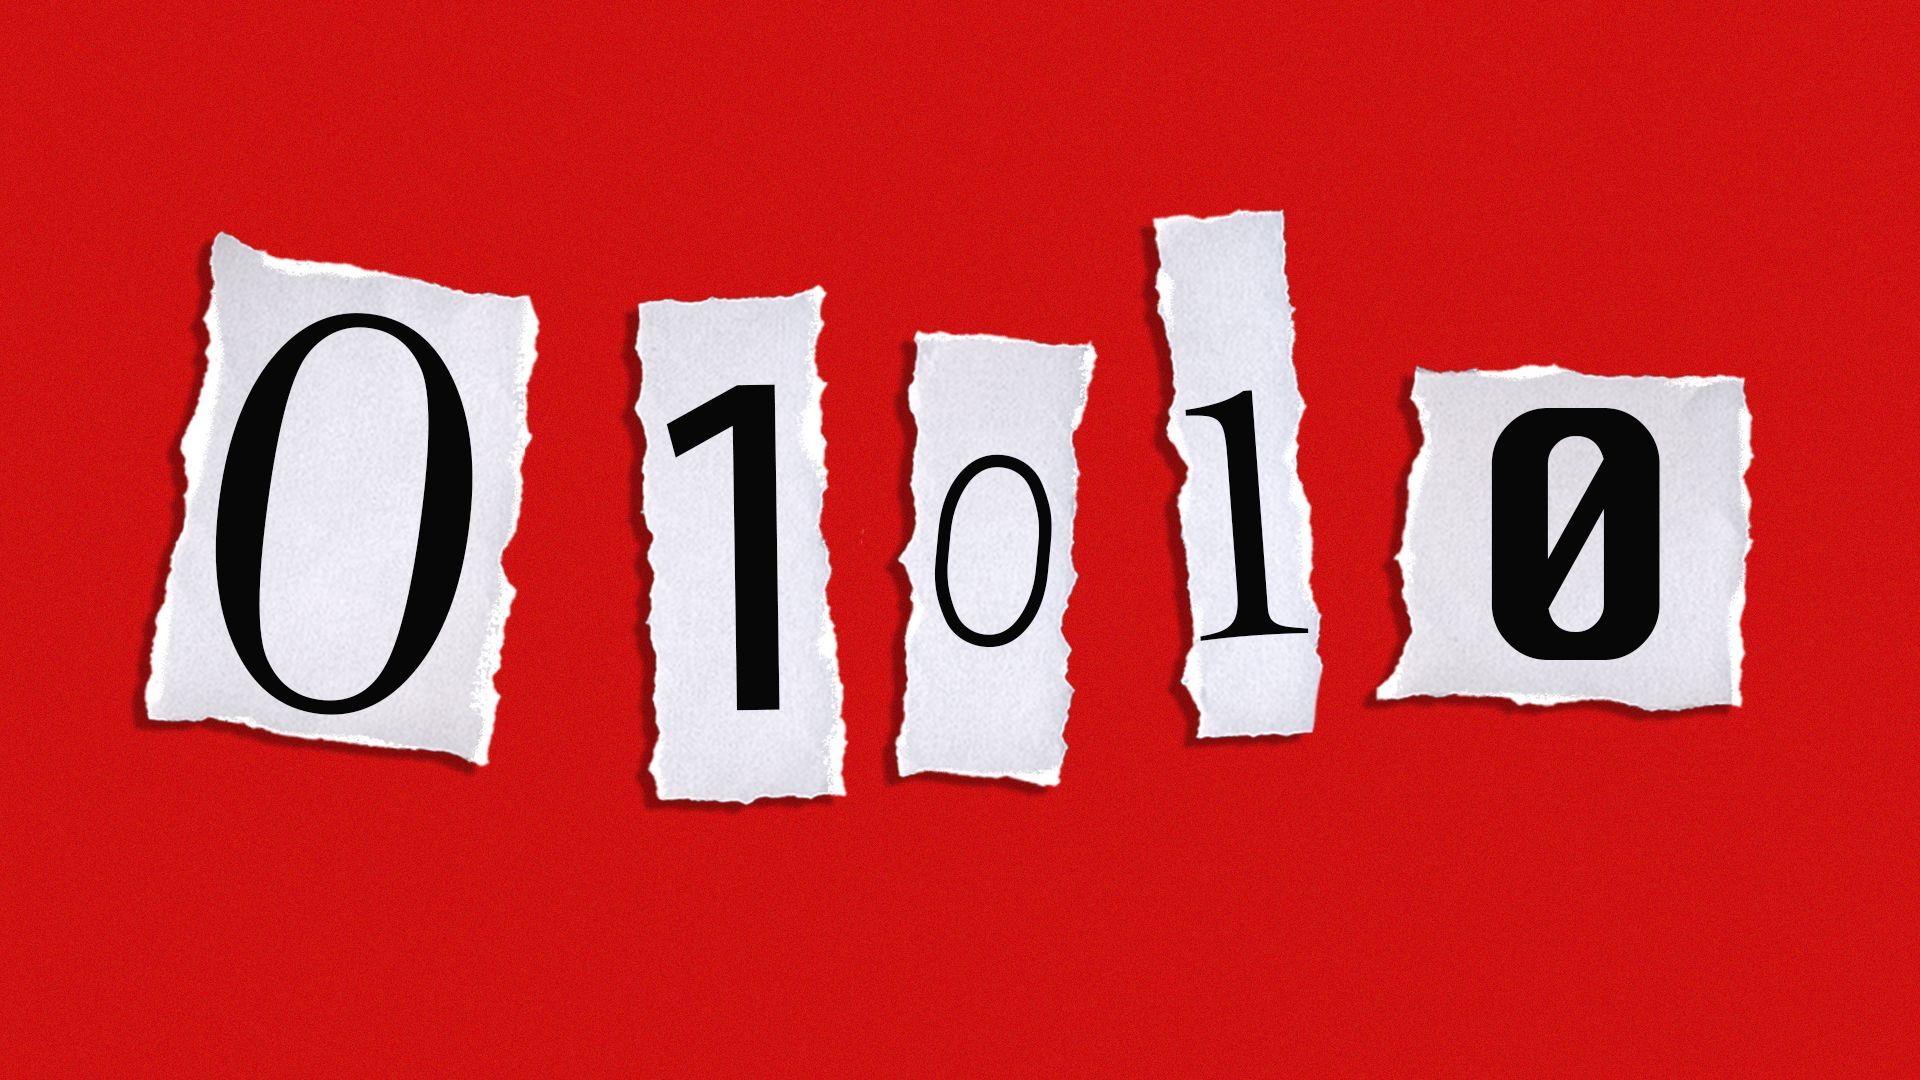 Illustration of a ransom note made of binary numbers.